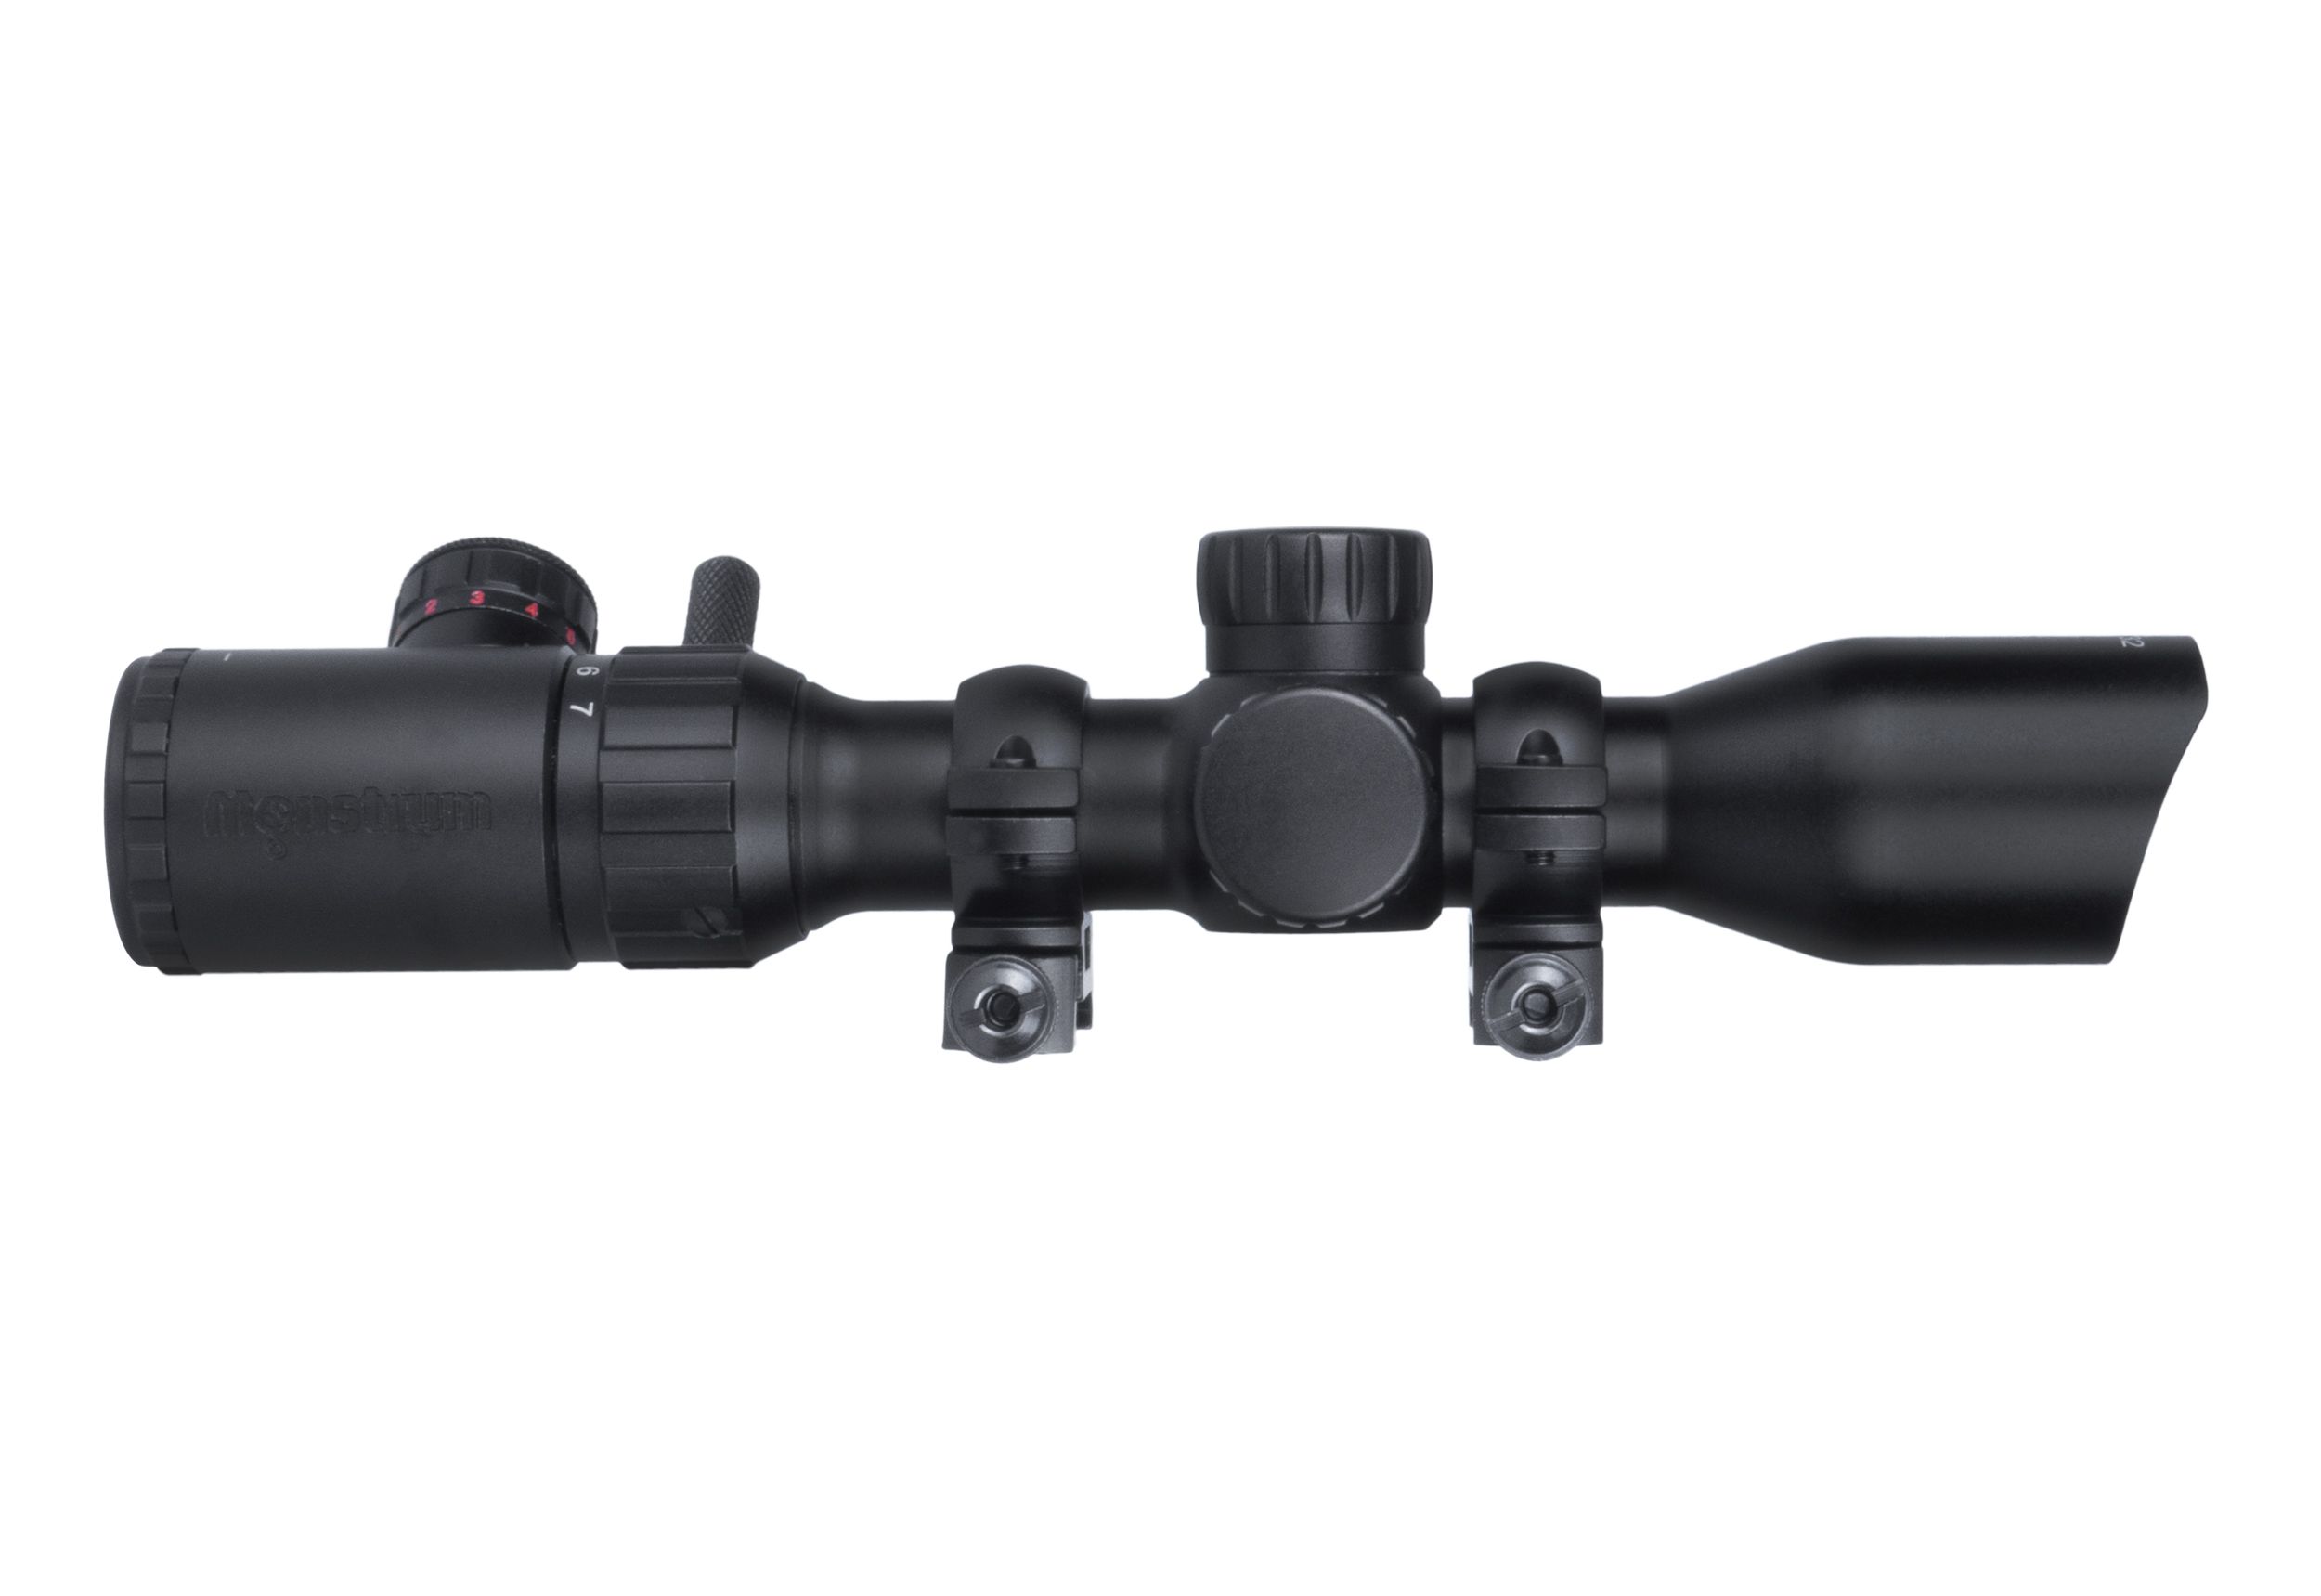 2-7x32 Tactical Scope Questions & Answers